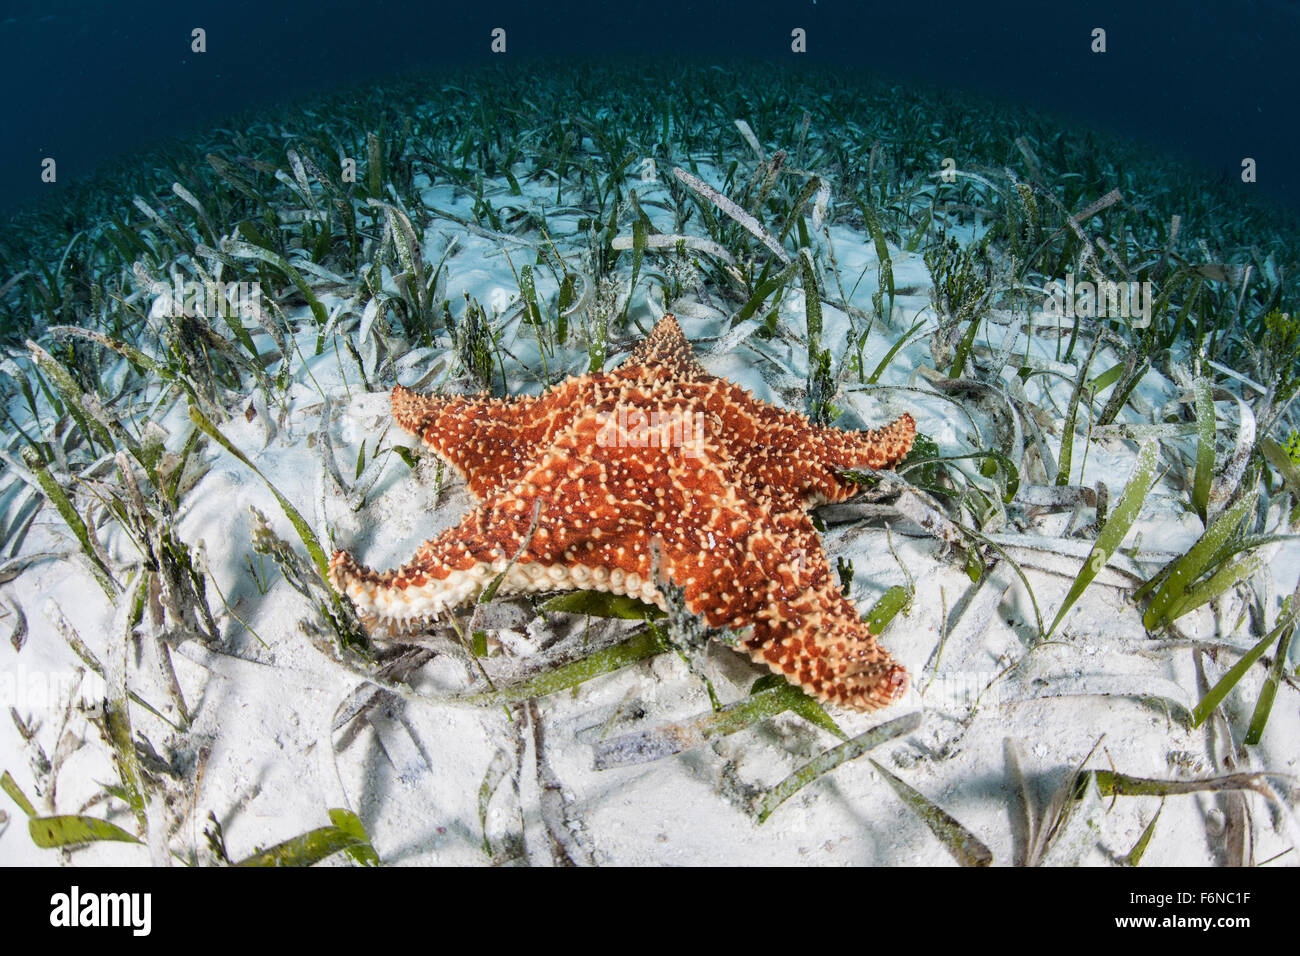 A West Indian starfish (Oreaster reticulatus) crawls slowly across a sand and seagrass seafloor in Turneffe Atoll, Belize. This Stock Photo